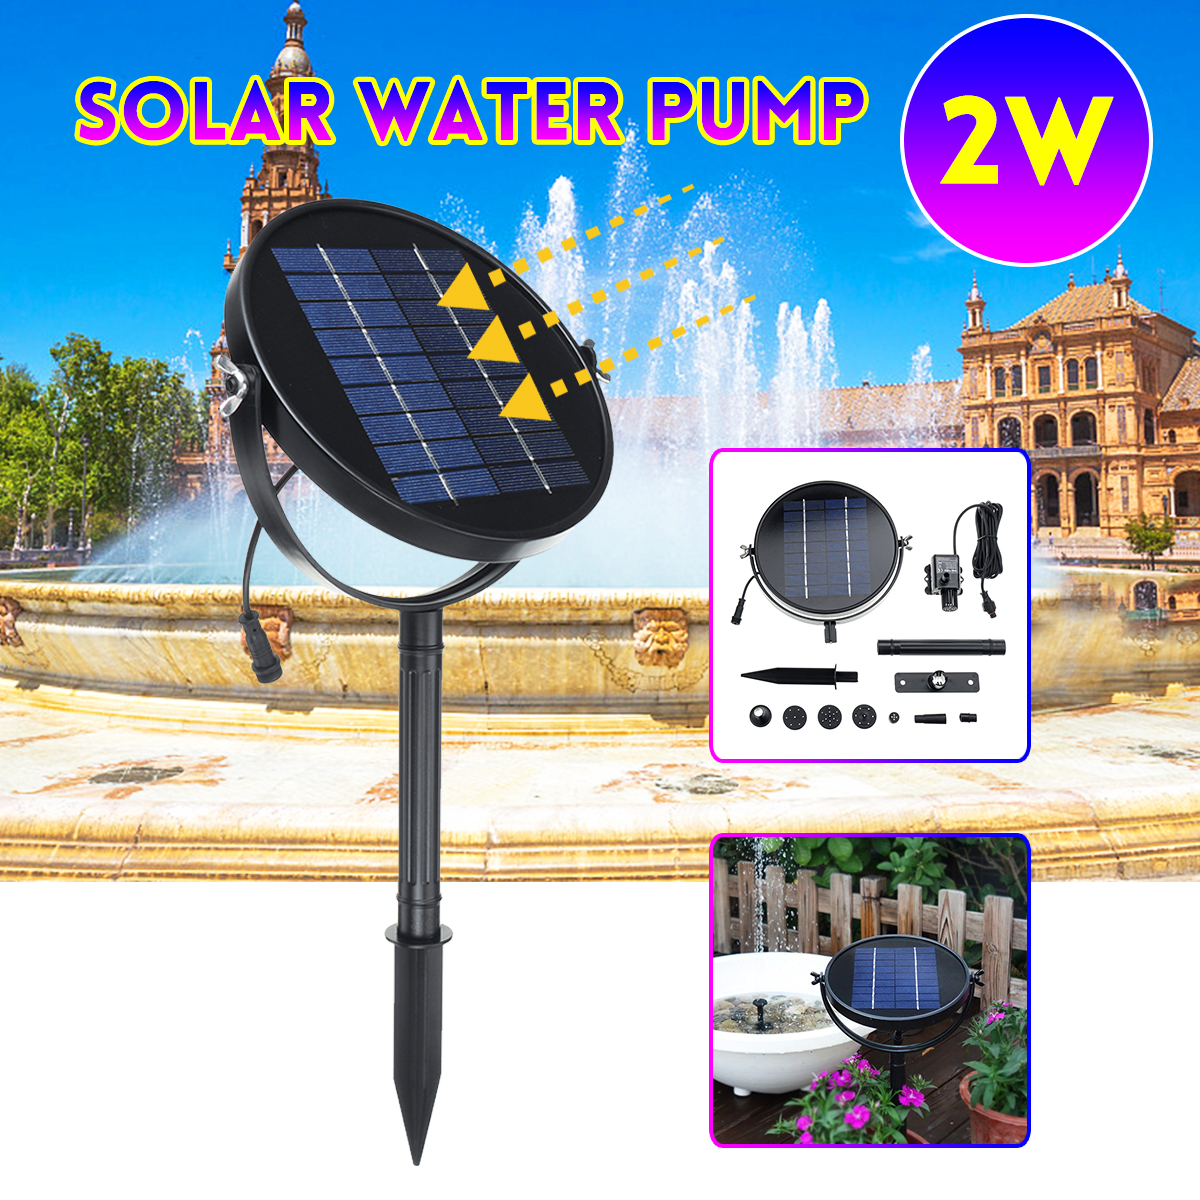 9V-2W-190LH-Solar-Power-Panel-Water-Pump-Ground-Water-Pool-Floating-Fountain-1543612-1